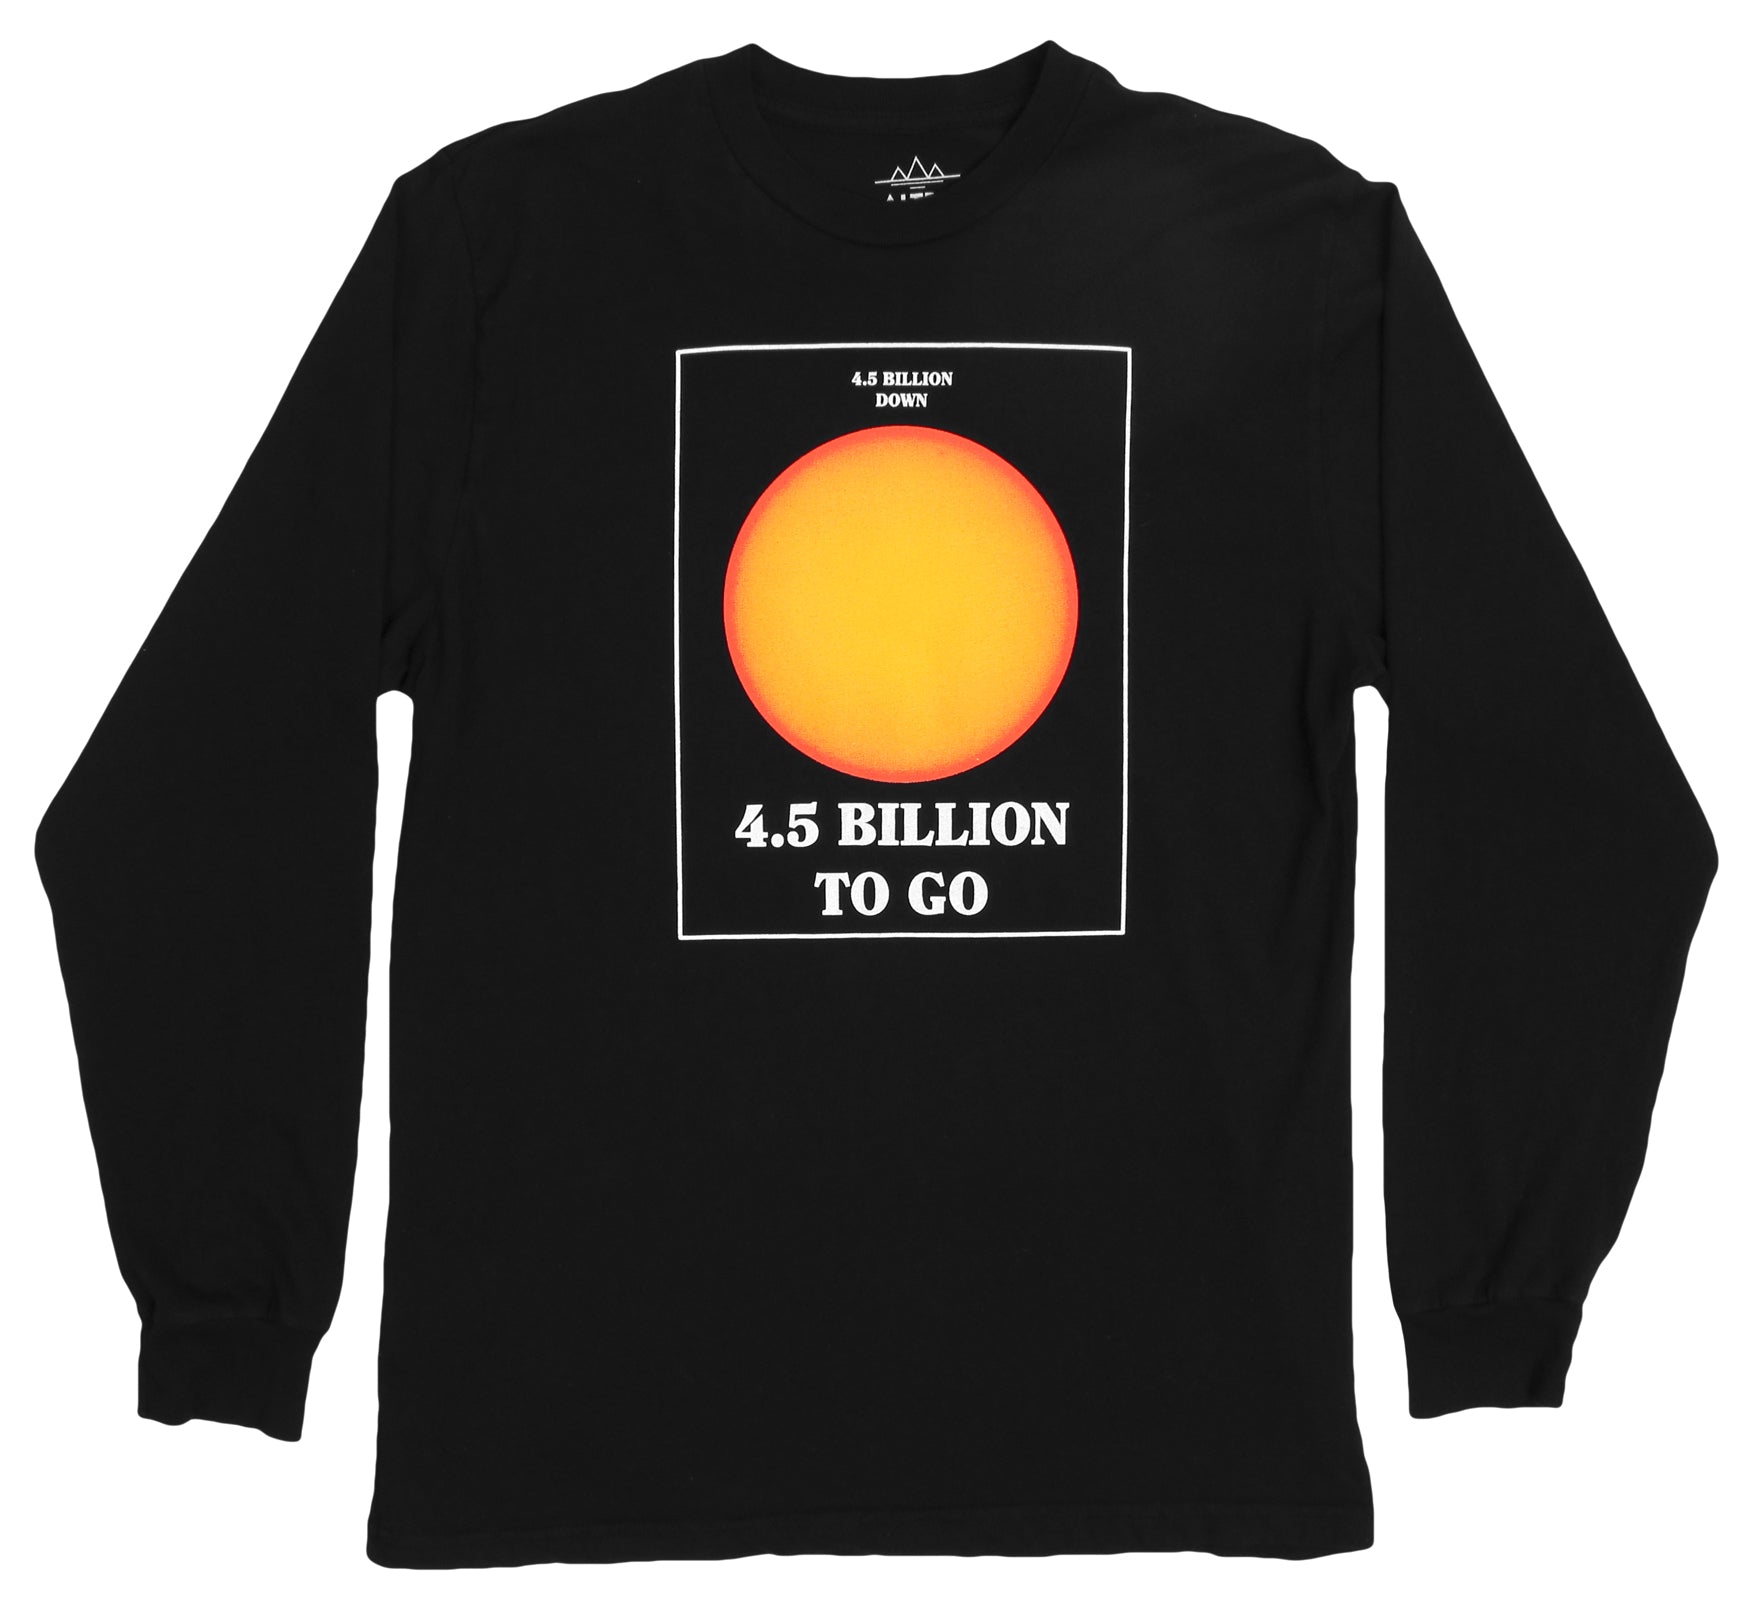 Fun Sun Facts about the sun dying, black long sleeve graphic tee